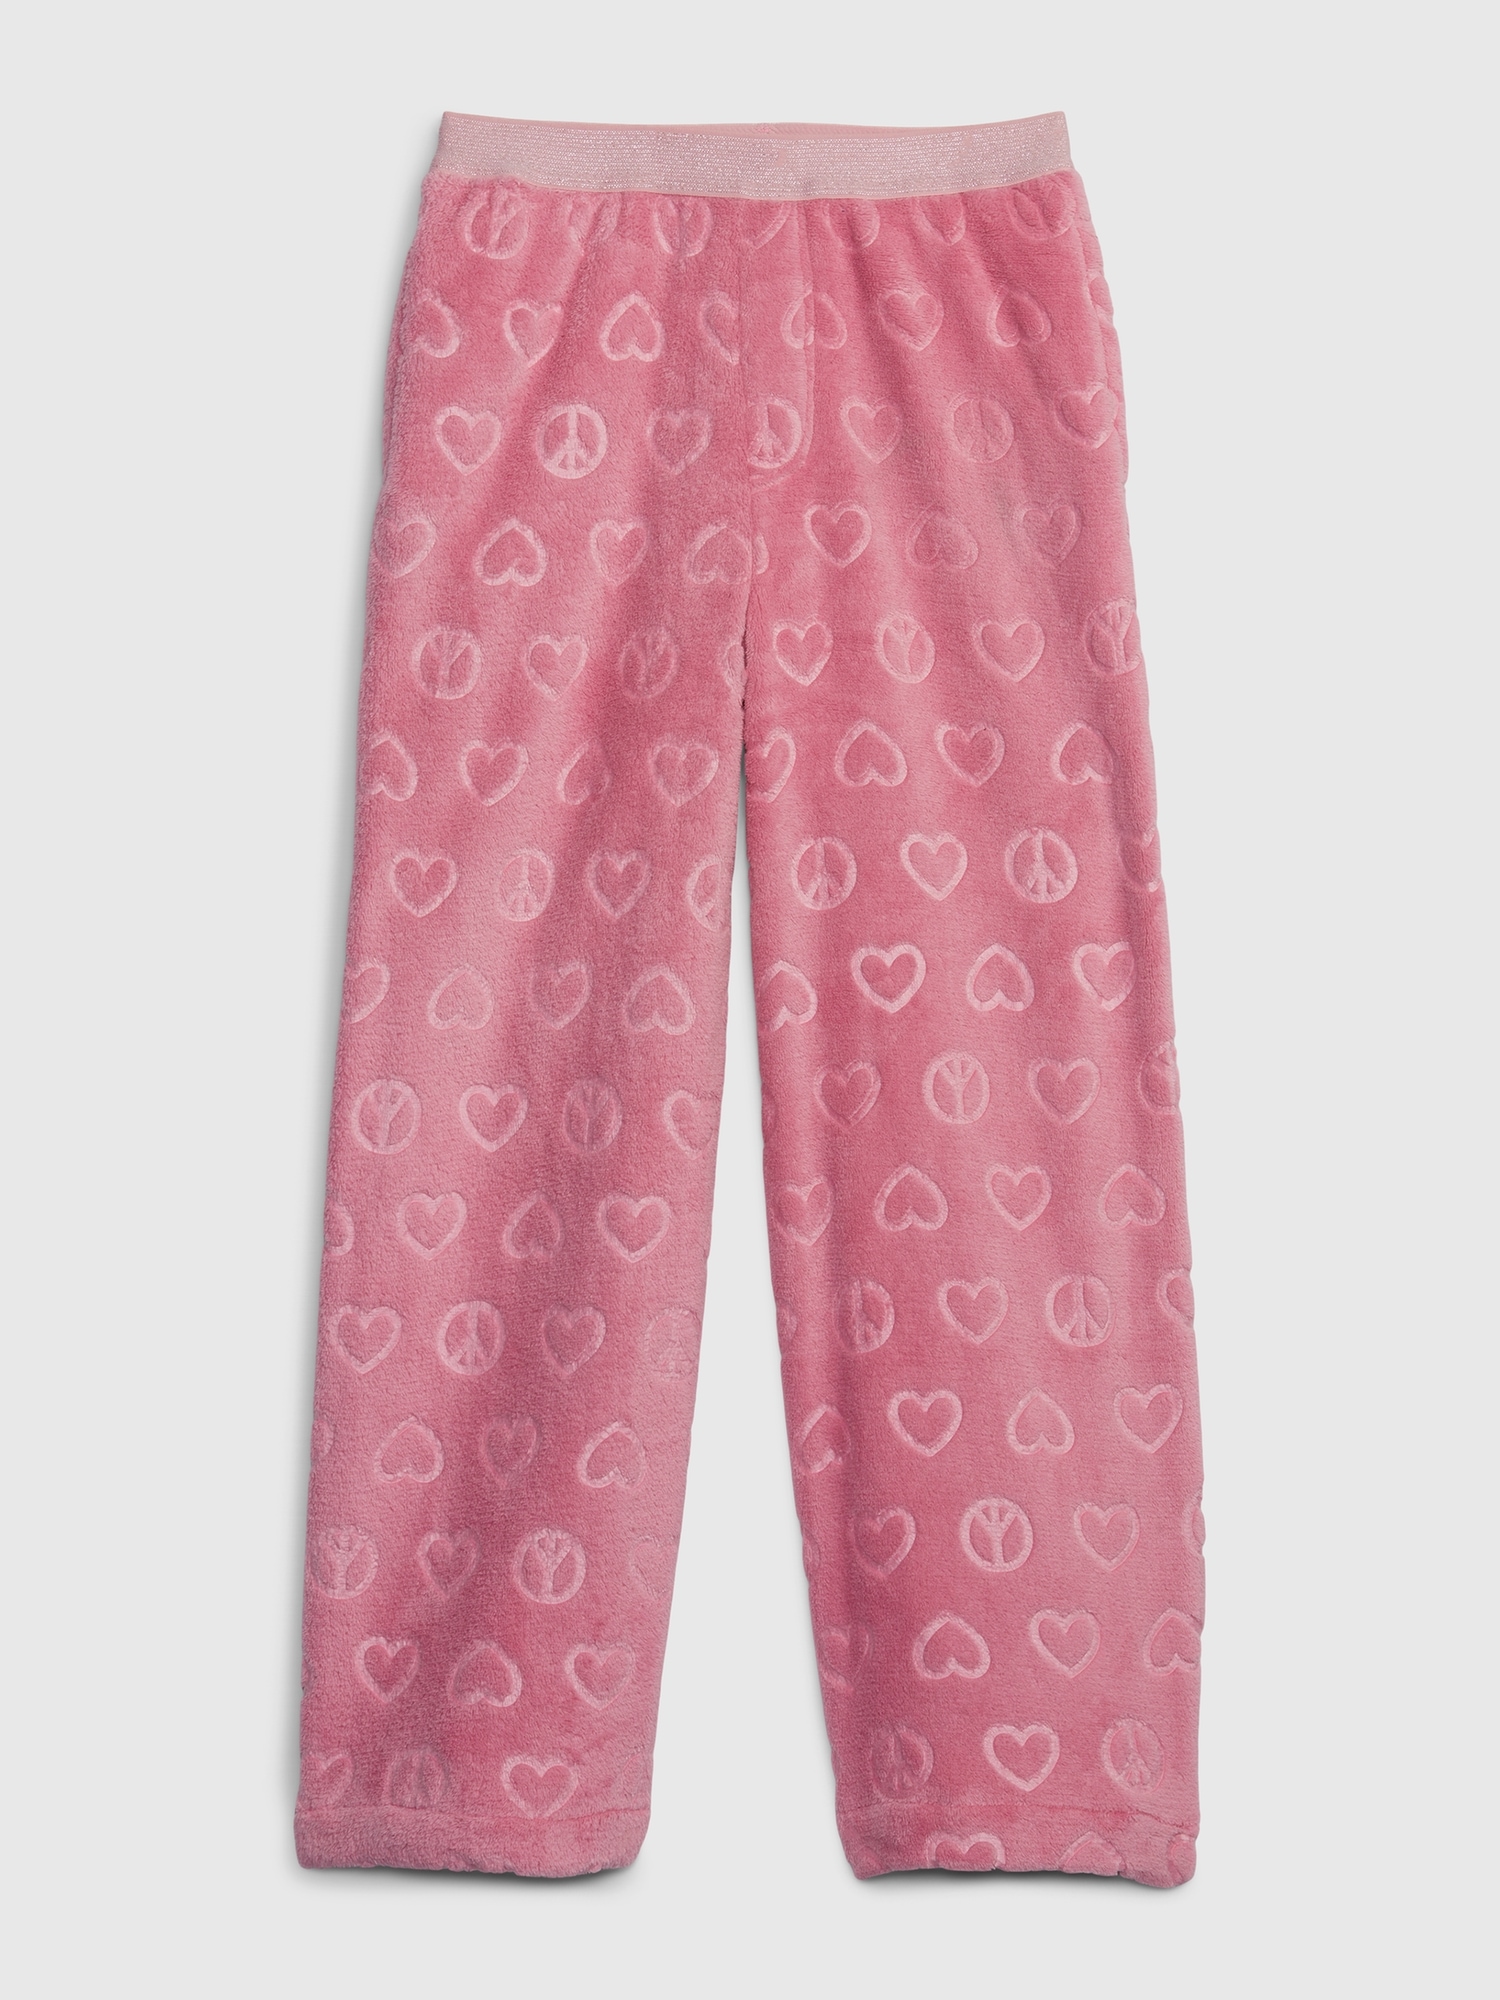 Women's Hanes Pajamas from $46 | Lyst